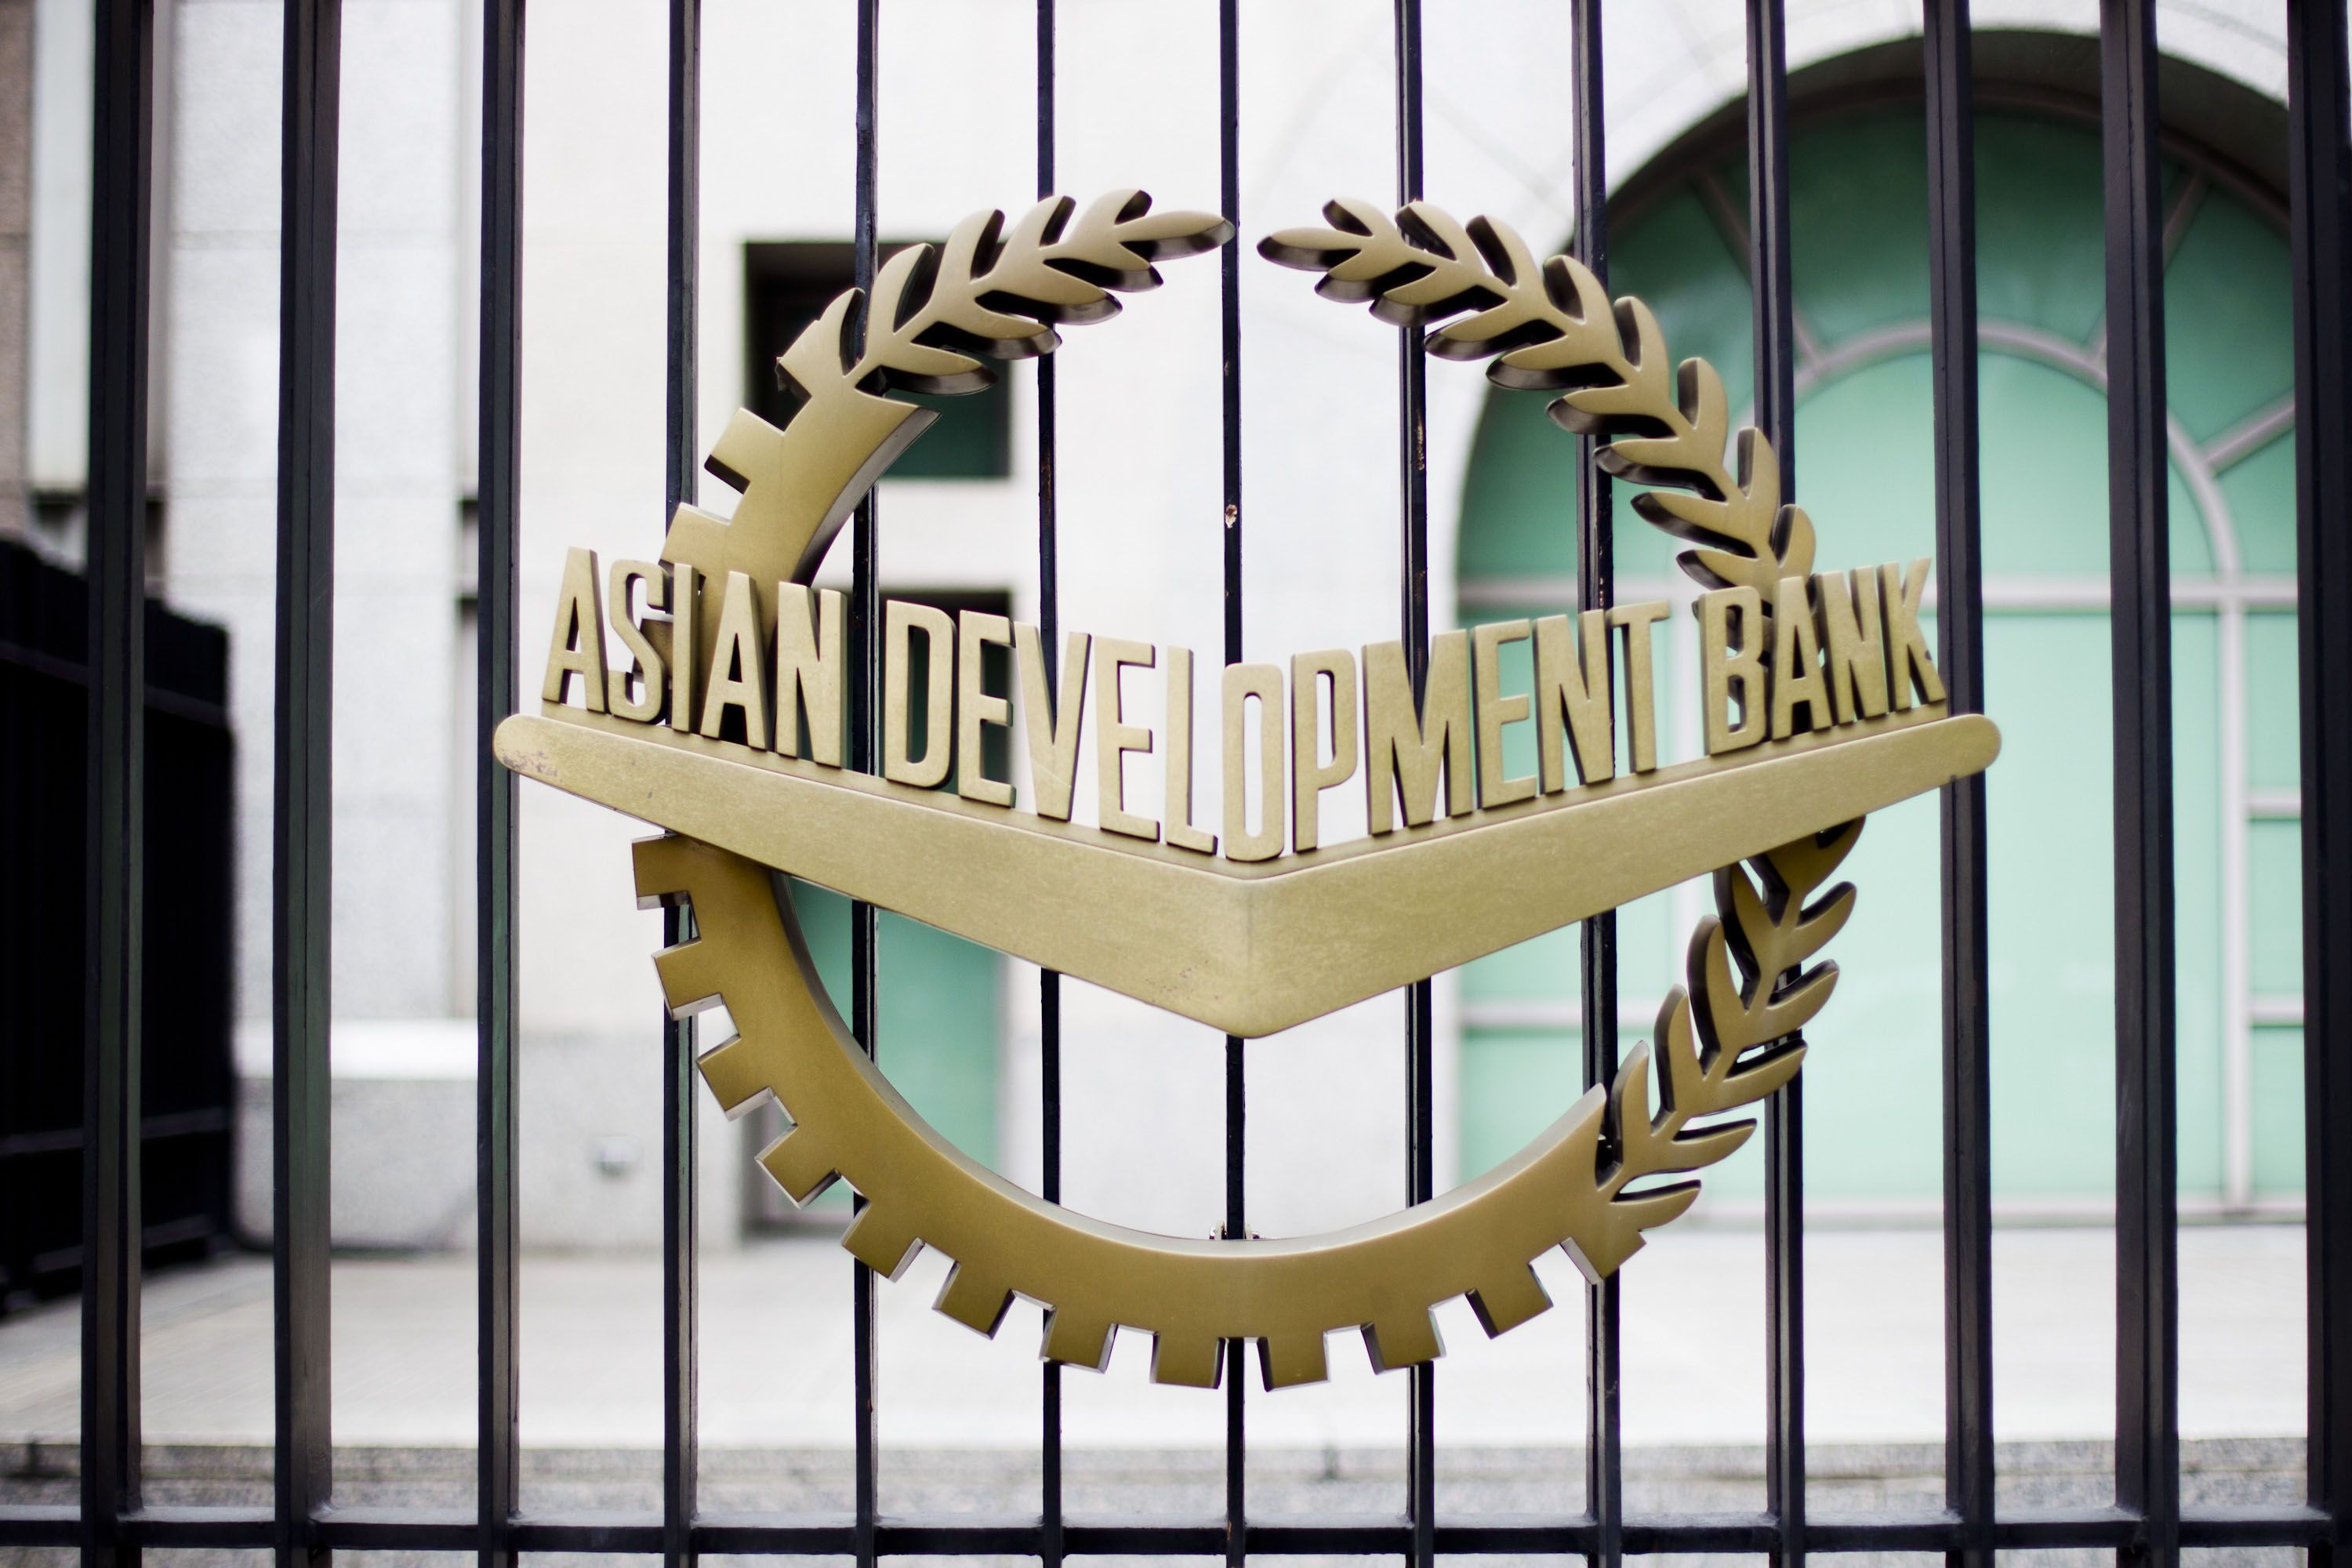 50 years on: the Asian Development Bank | Foreign Brief